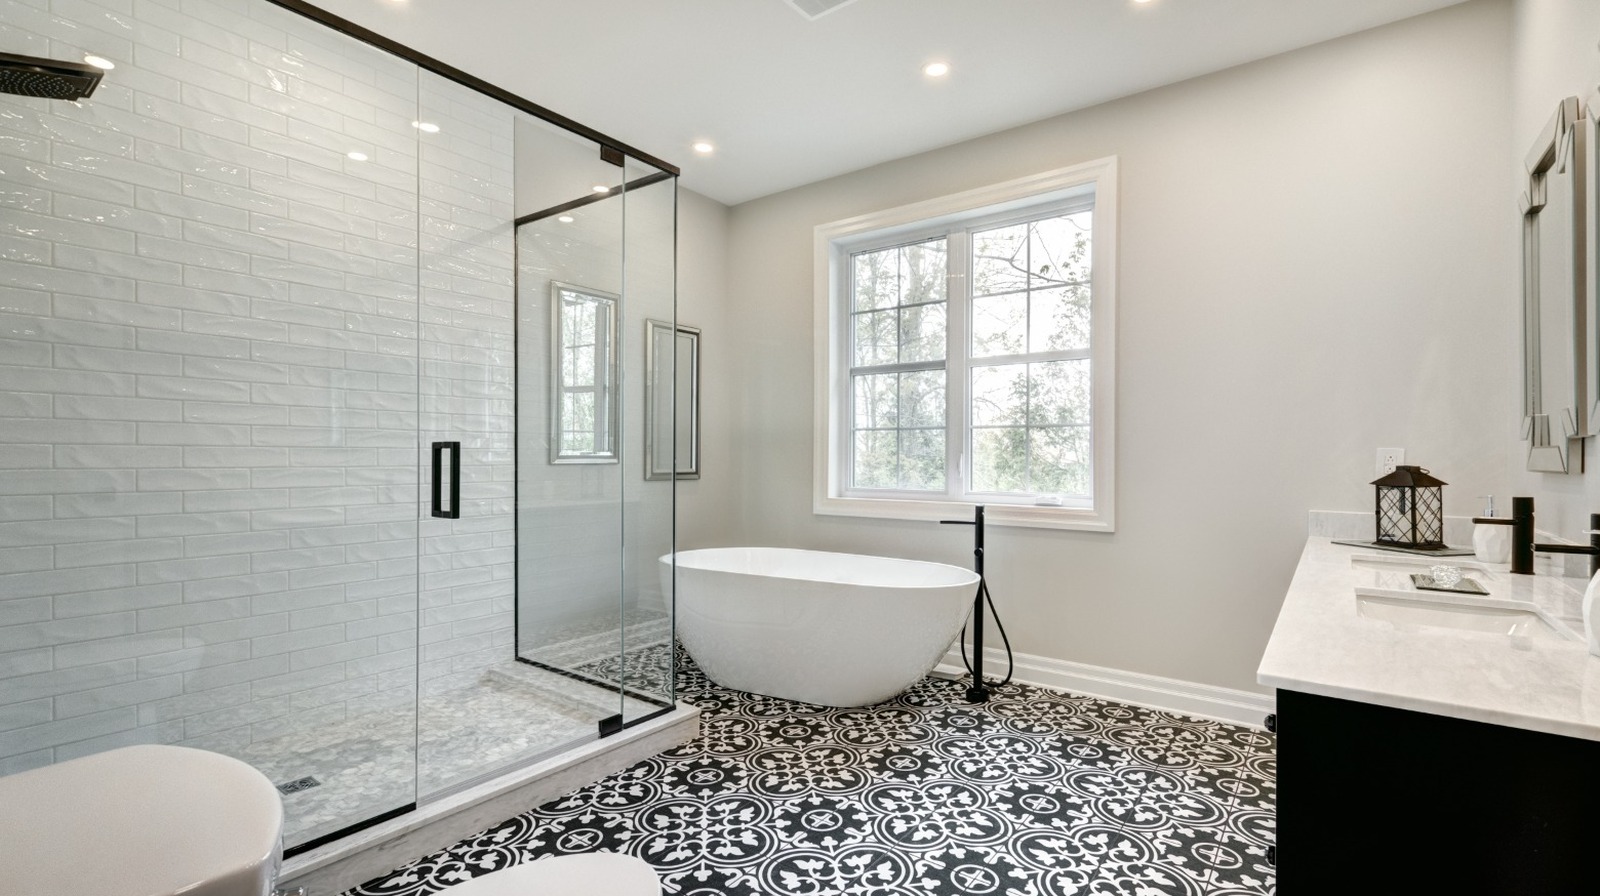 https://www.housedigest.com/img/gallery/heat-up-your-chilly-basement-bathroom-with-these-simple-tips/l-intro-1680263781.jpg